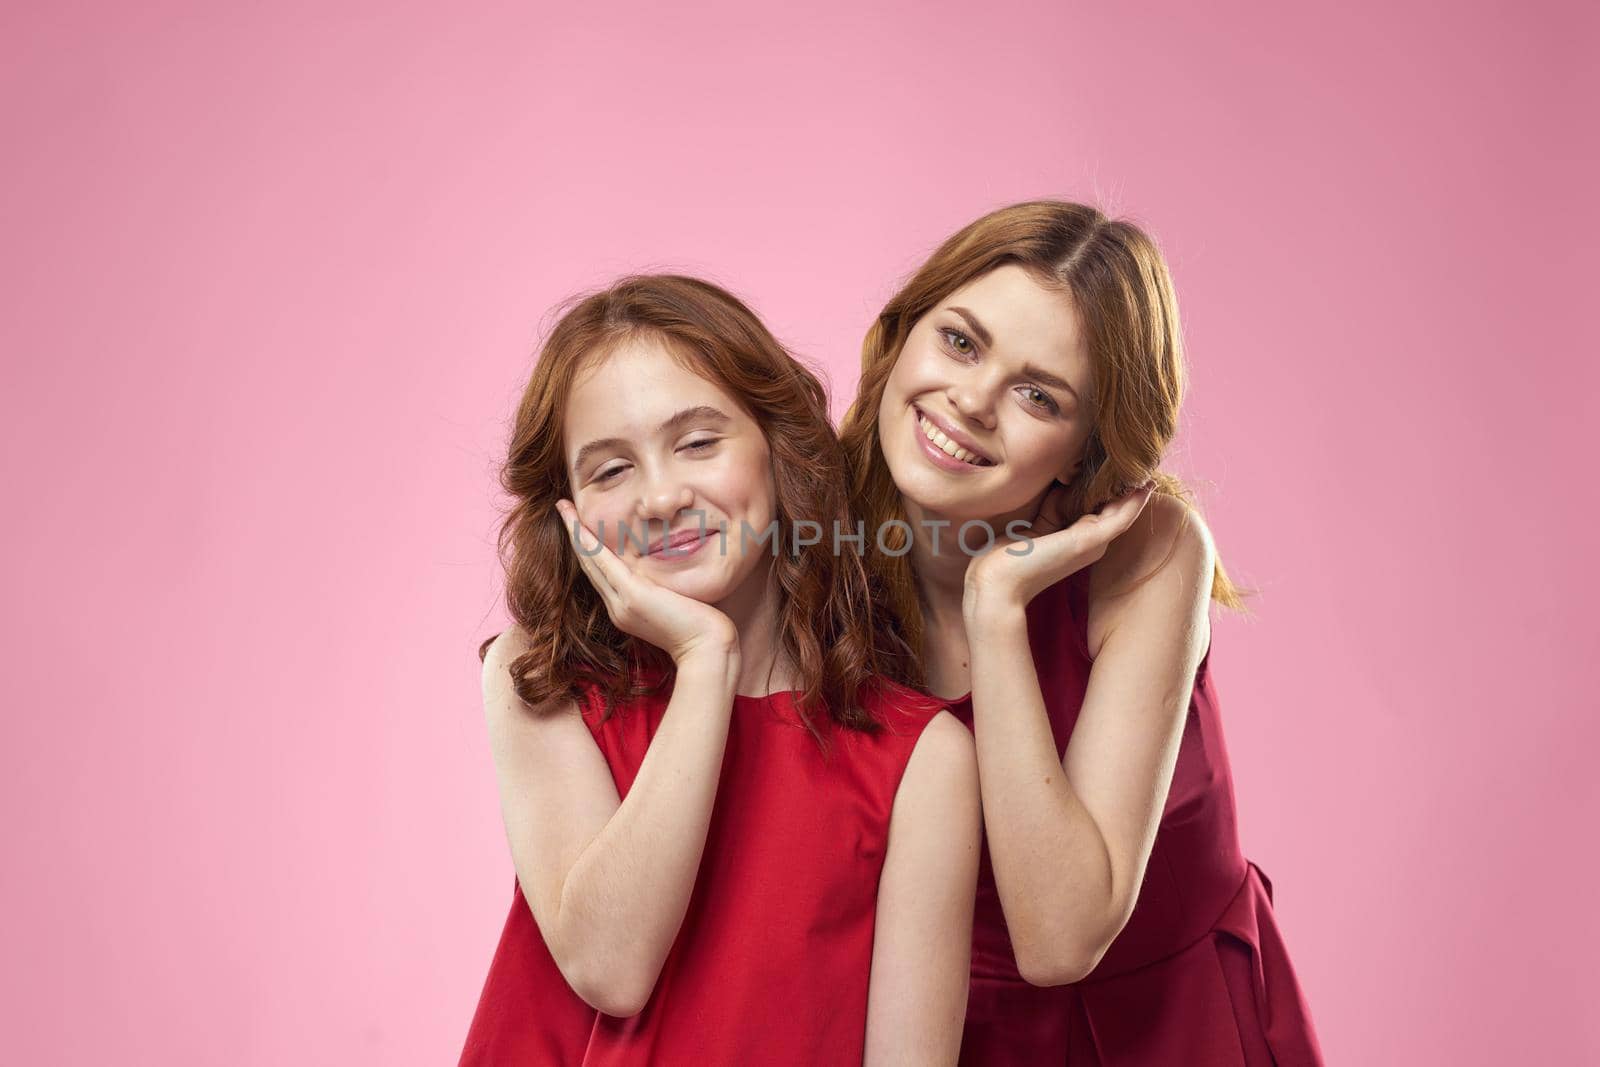 Cheerful mom and daughter wearing red dresses are standing next to joy family on pink background. High quality photo